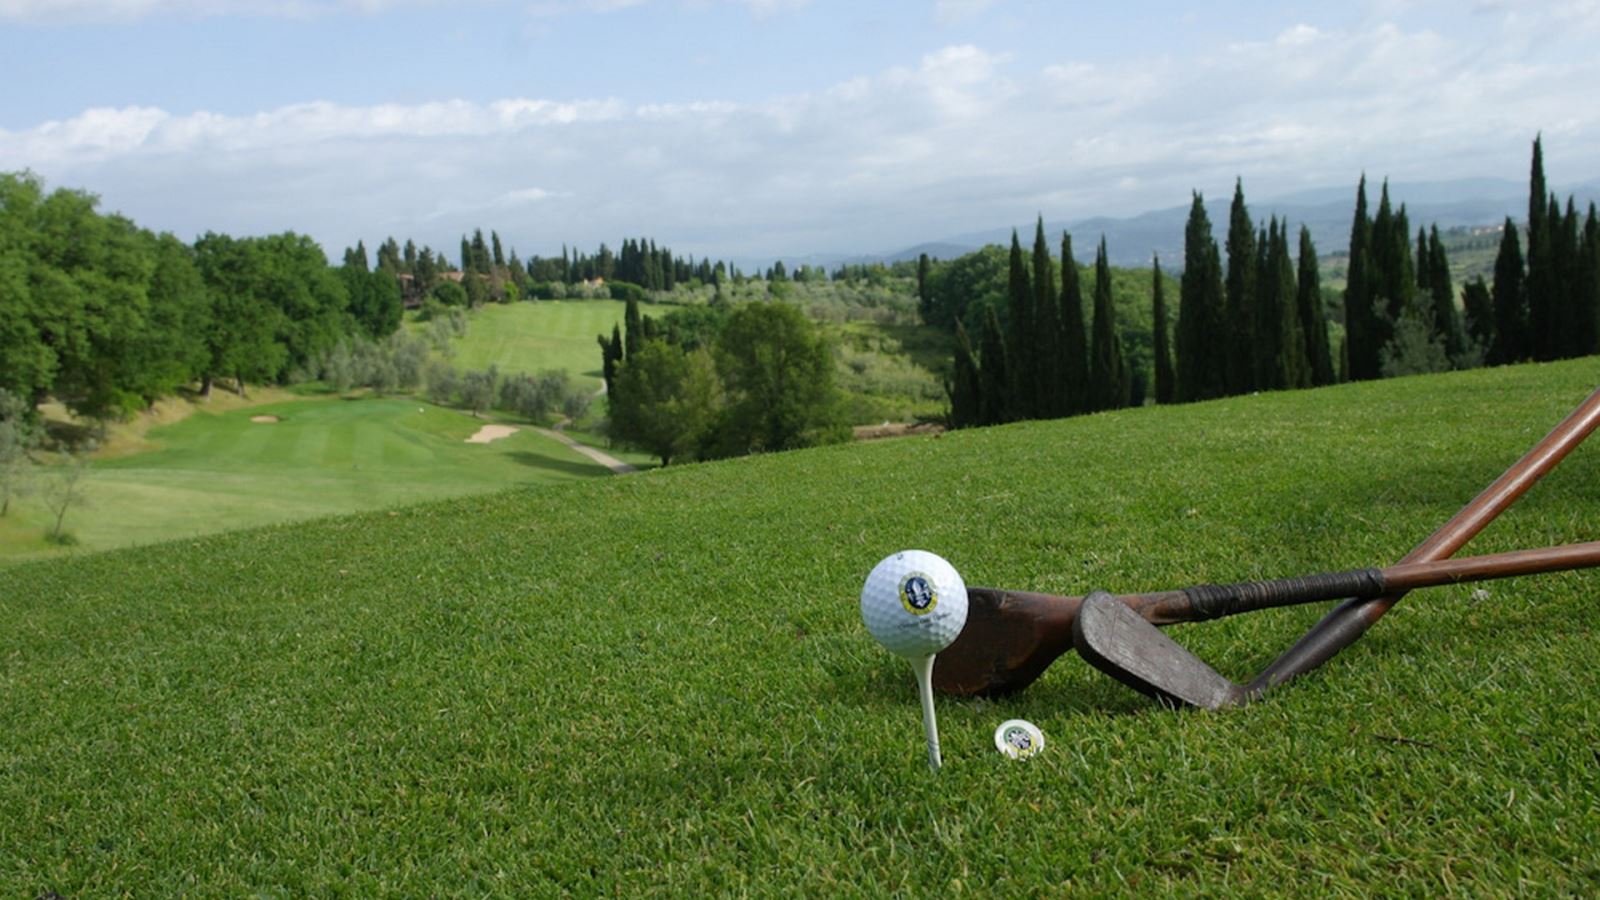 Golf Ugolino, above, is the oldest course in Tuscany